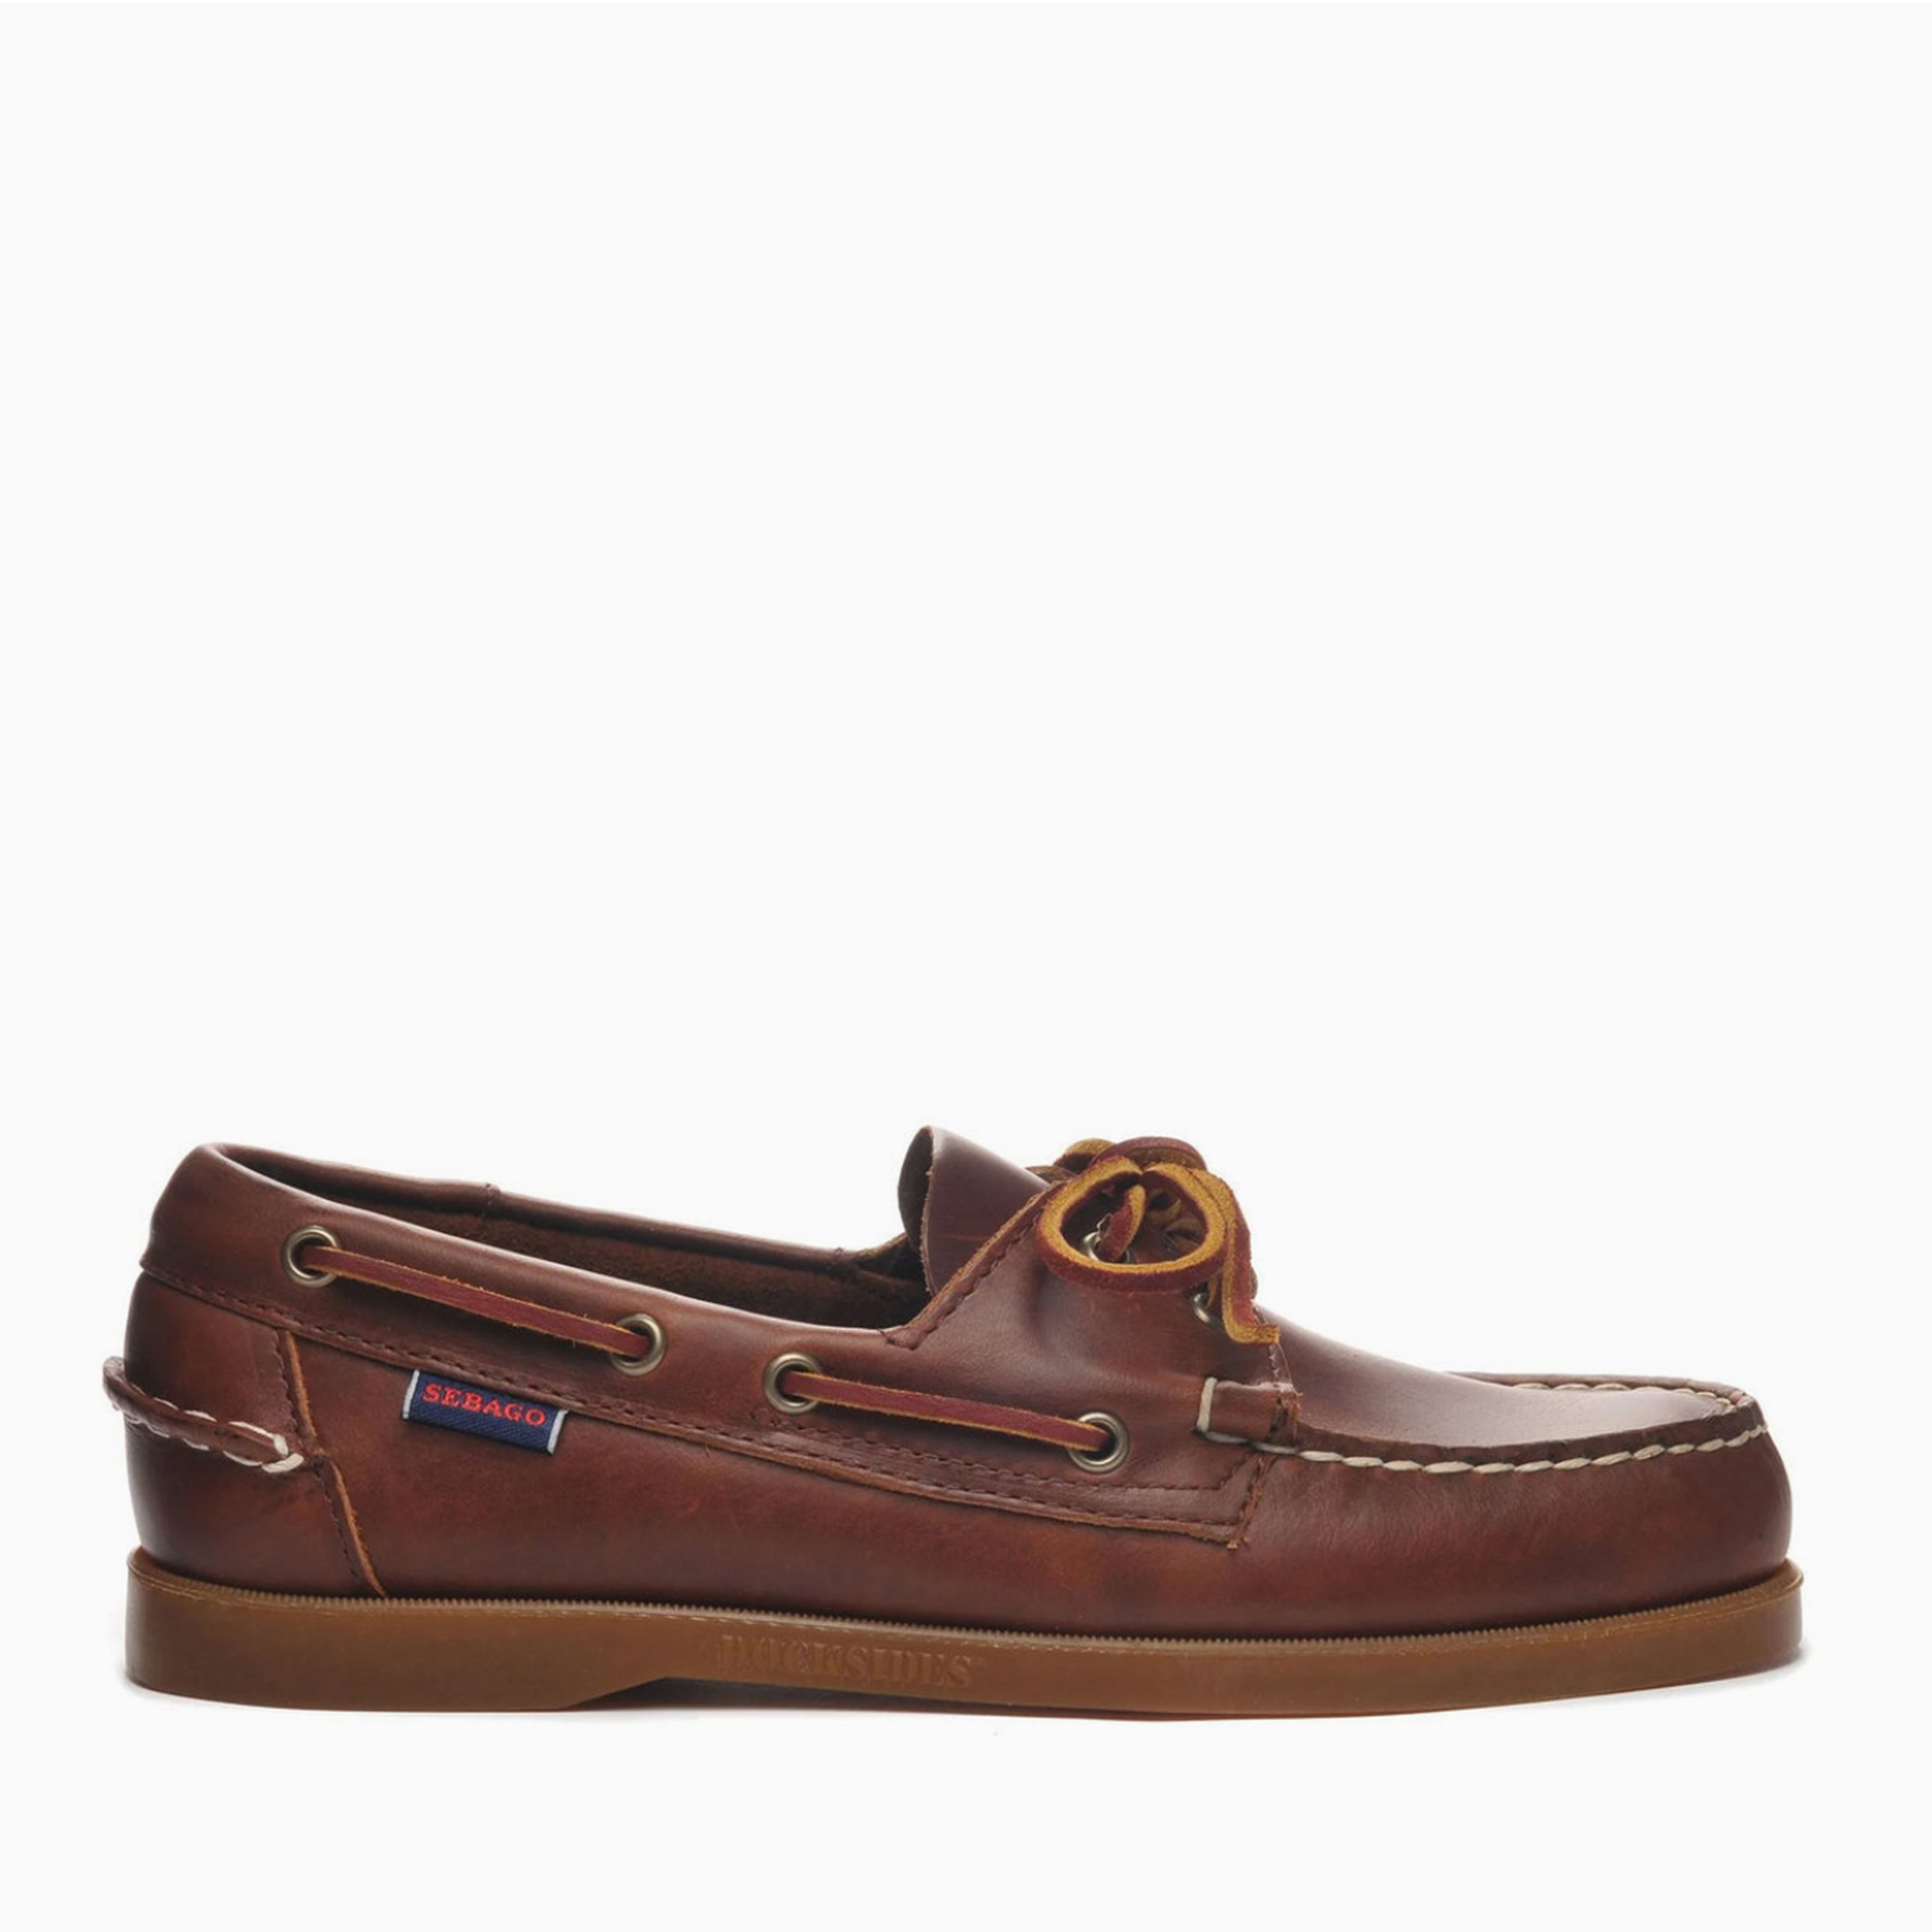 The Boat Shoes